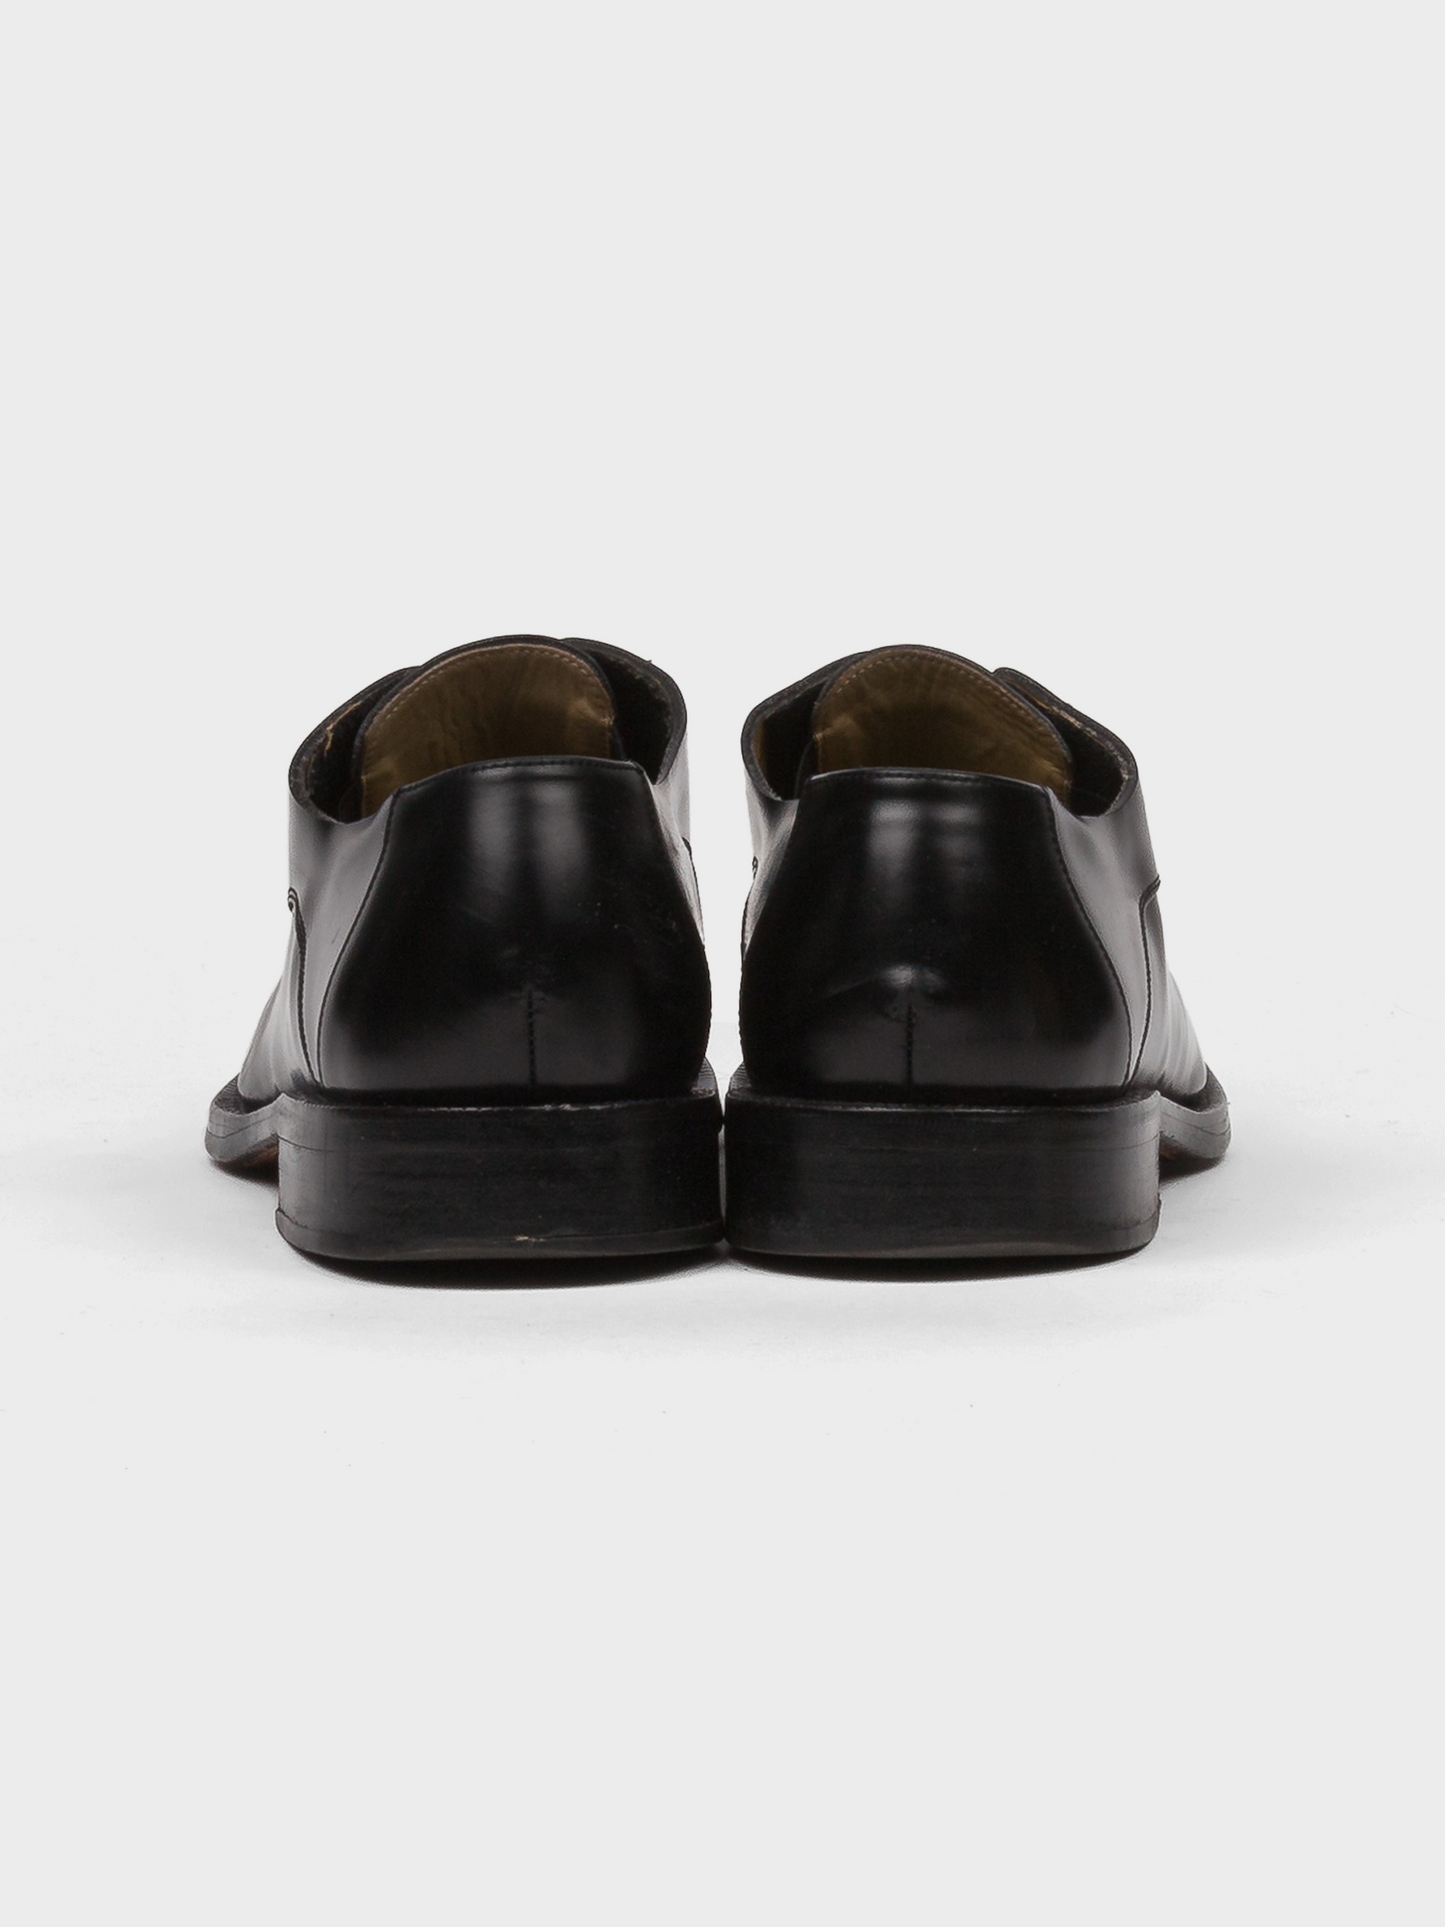 Raf-era Front Flap Loafers - Groupie